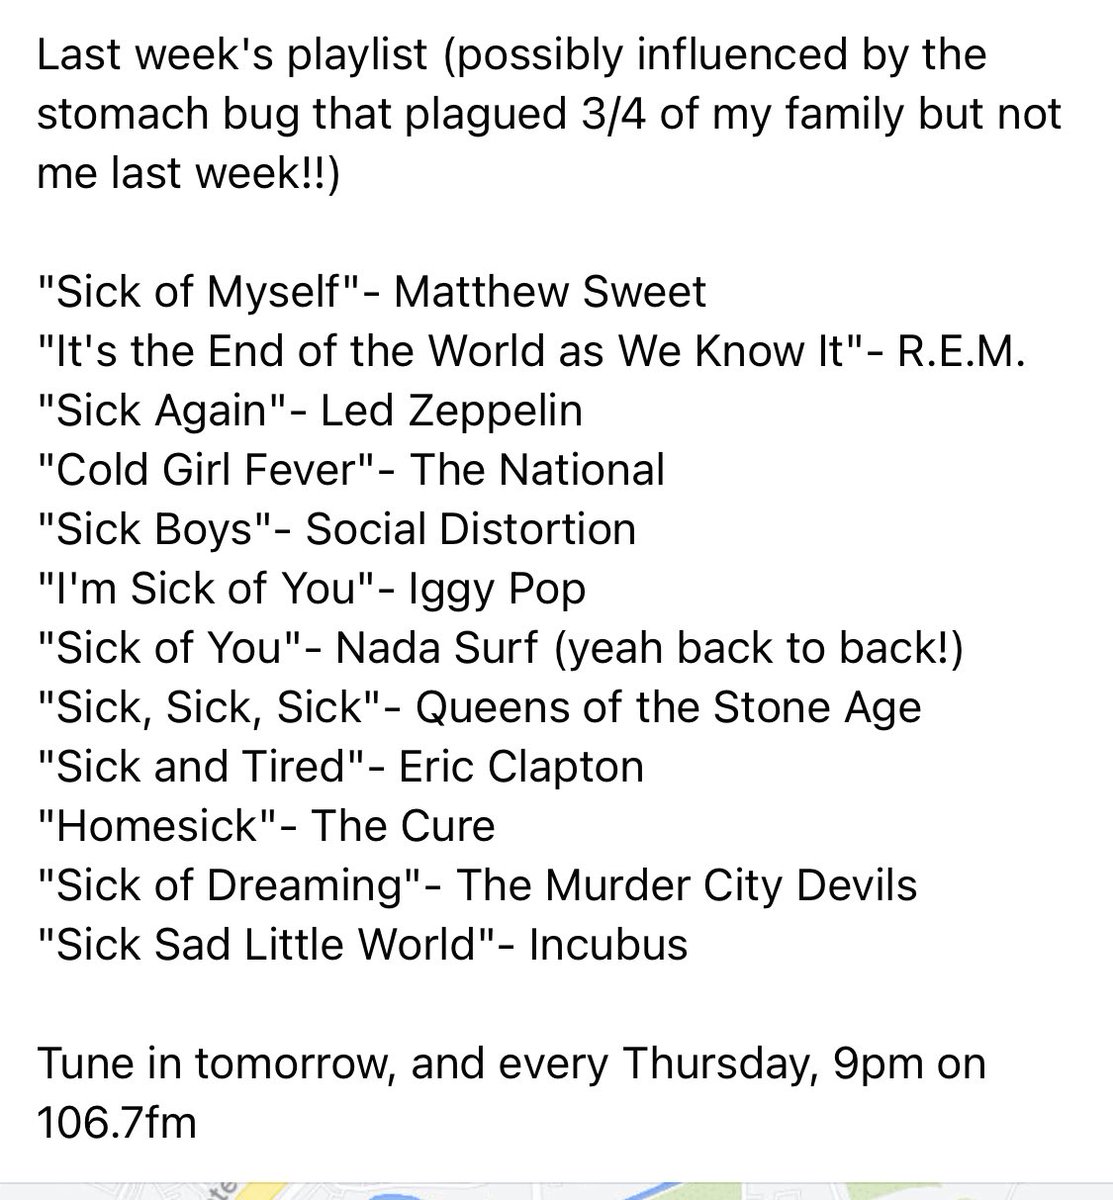 Last week’s playlist featured @remhq, @ledzeppelin, @TheNational, @SocialD1, @IggyPop, @nadasurf, @qotsa, @EricClapton, @thecure, @MurderCity, @IncubusBand & more. Tune in every Thursday, 9pm, on @KGTNGeorgetown 💕🎶